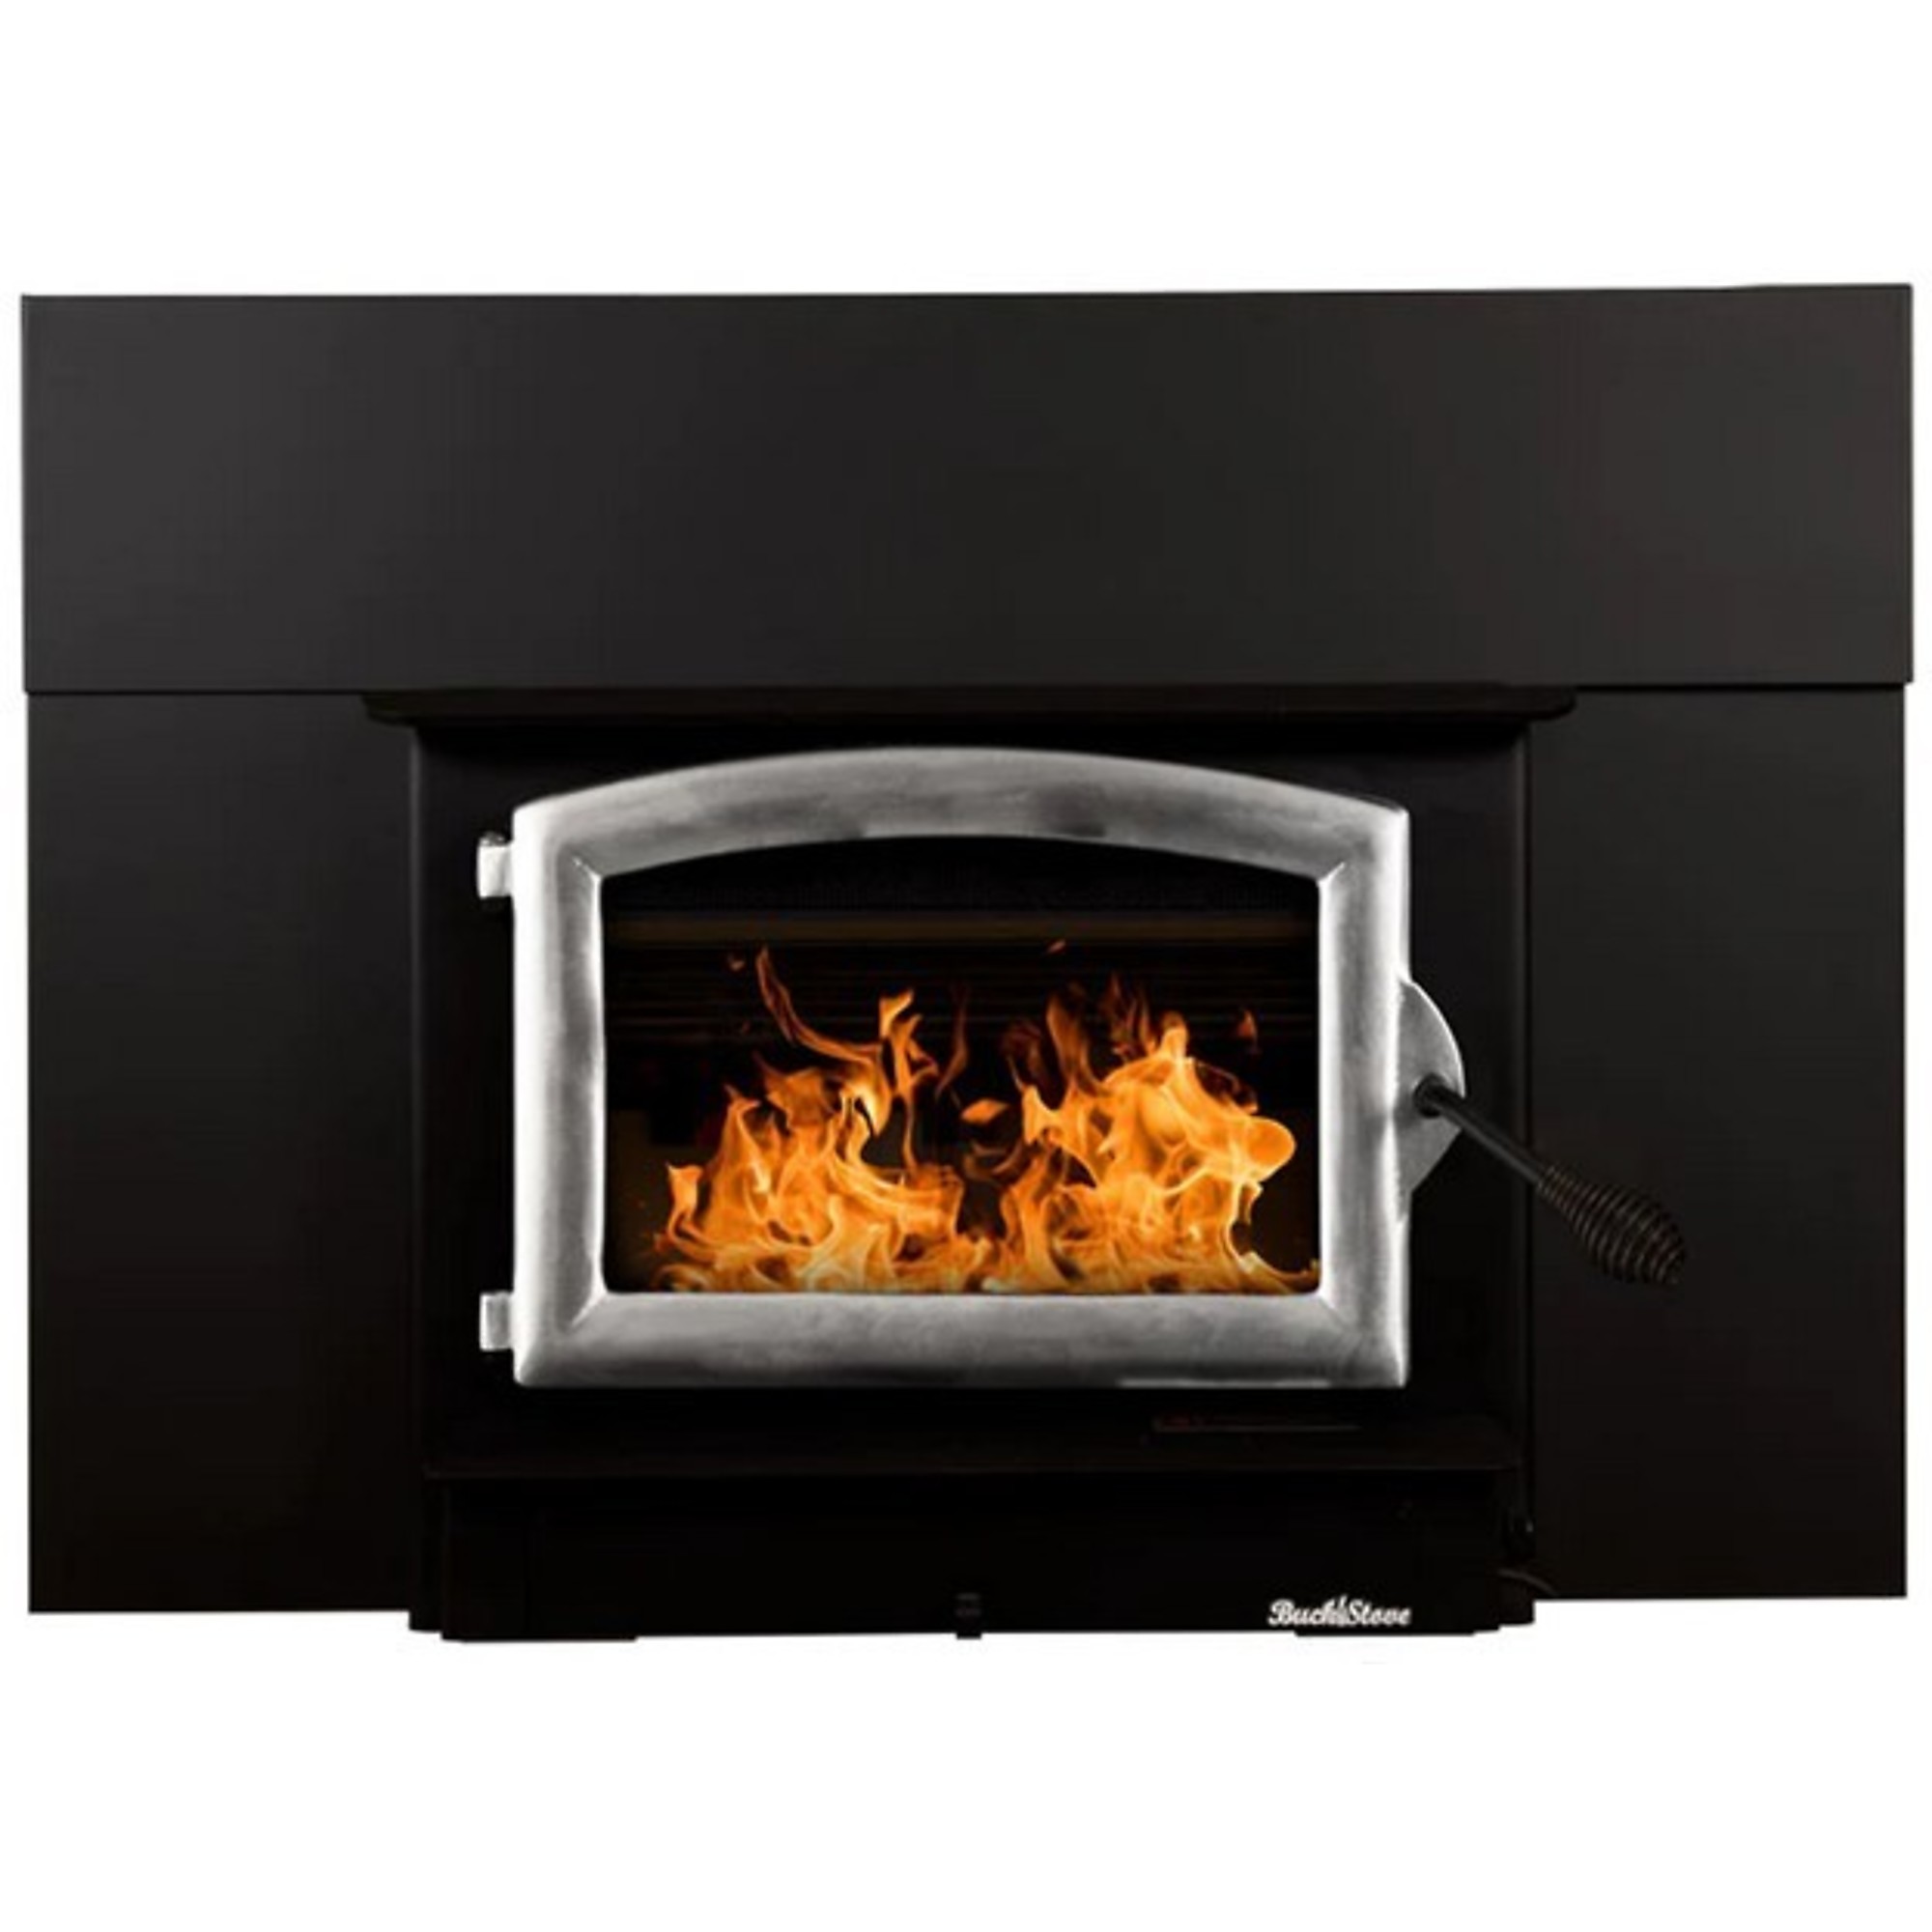 Buck, Wood Burning Insert withh Pewter Door and Blower, Heat Output 52400 Btu/hour, Heating Capability 2600 ftÂ², Model FP 74PSI